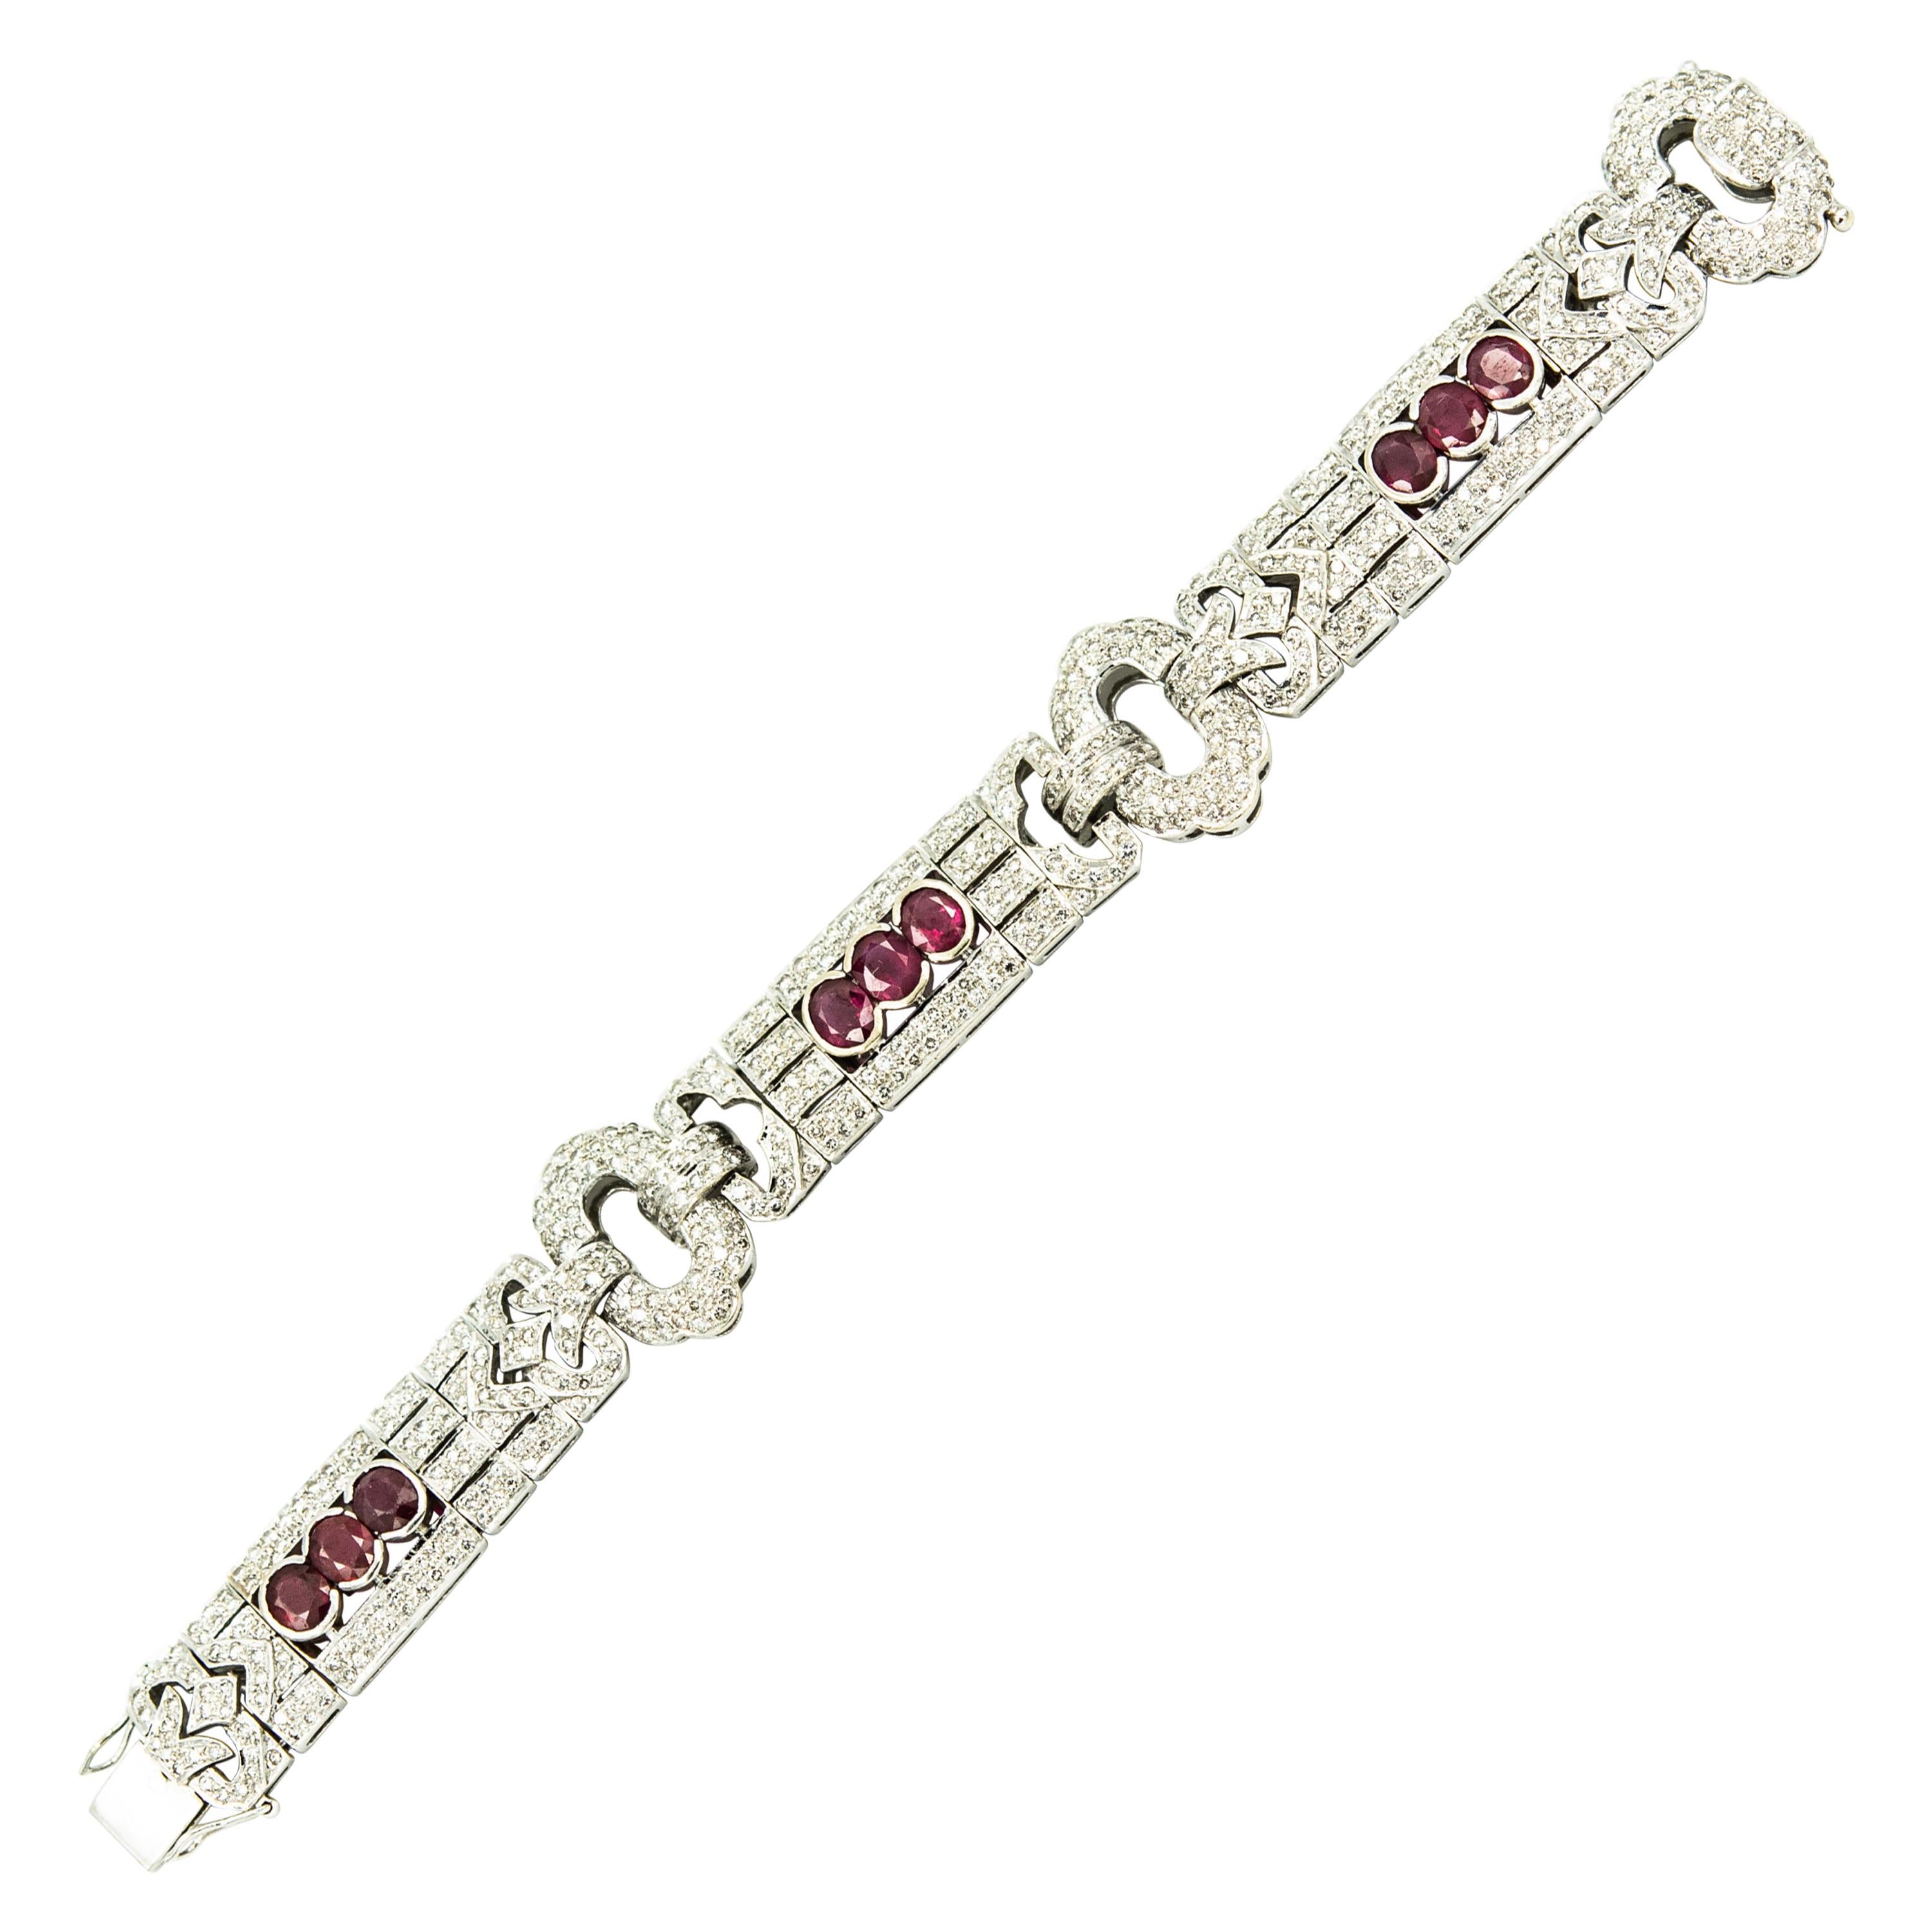 Wide Art Deco Style Diamond and Ruby White Gold Bracelet For Sale